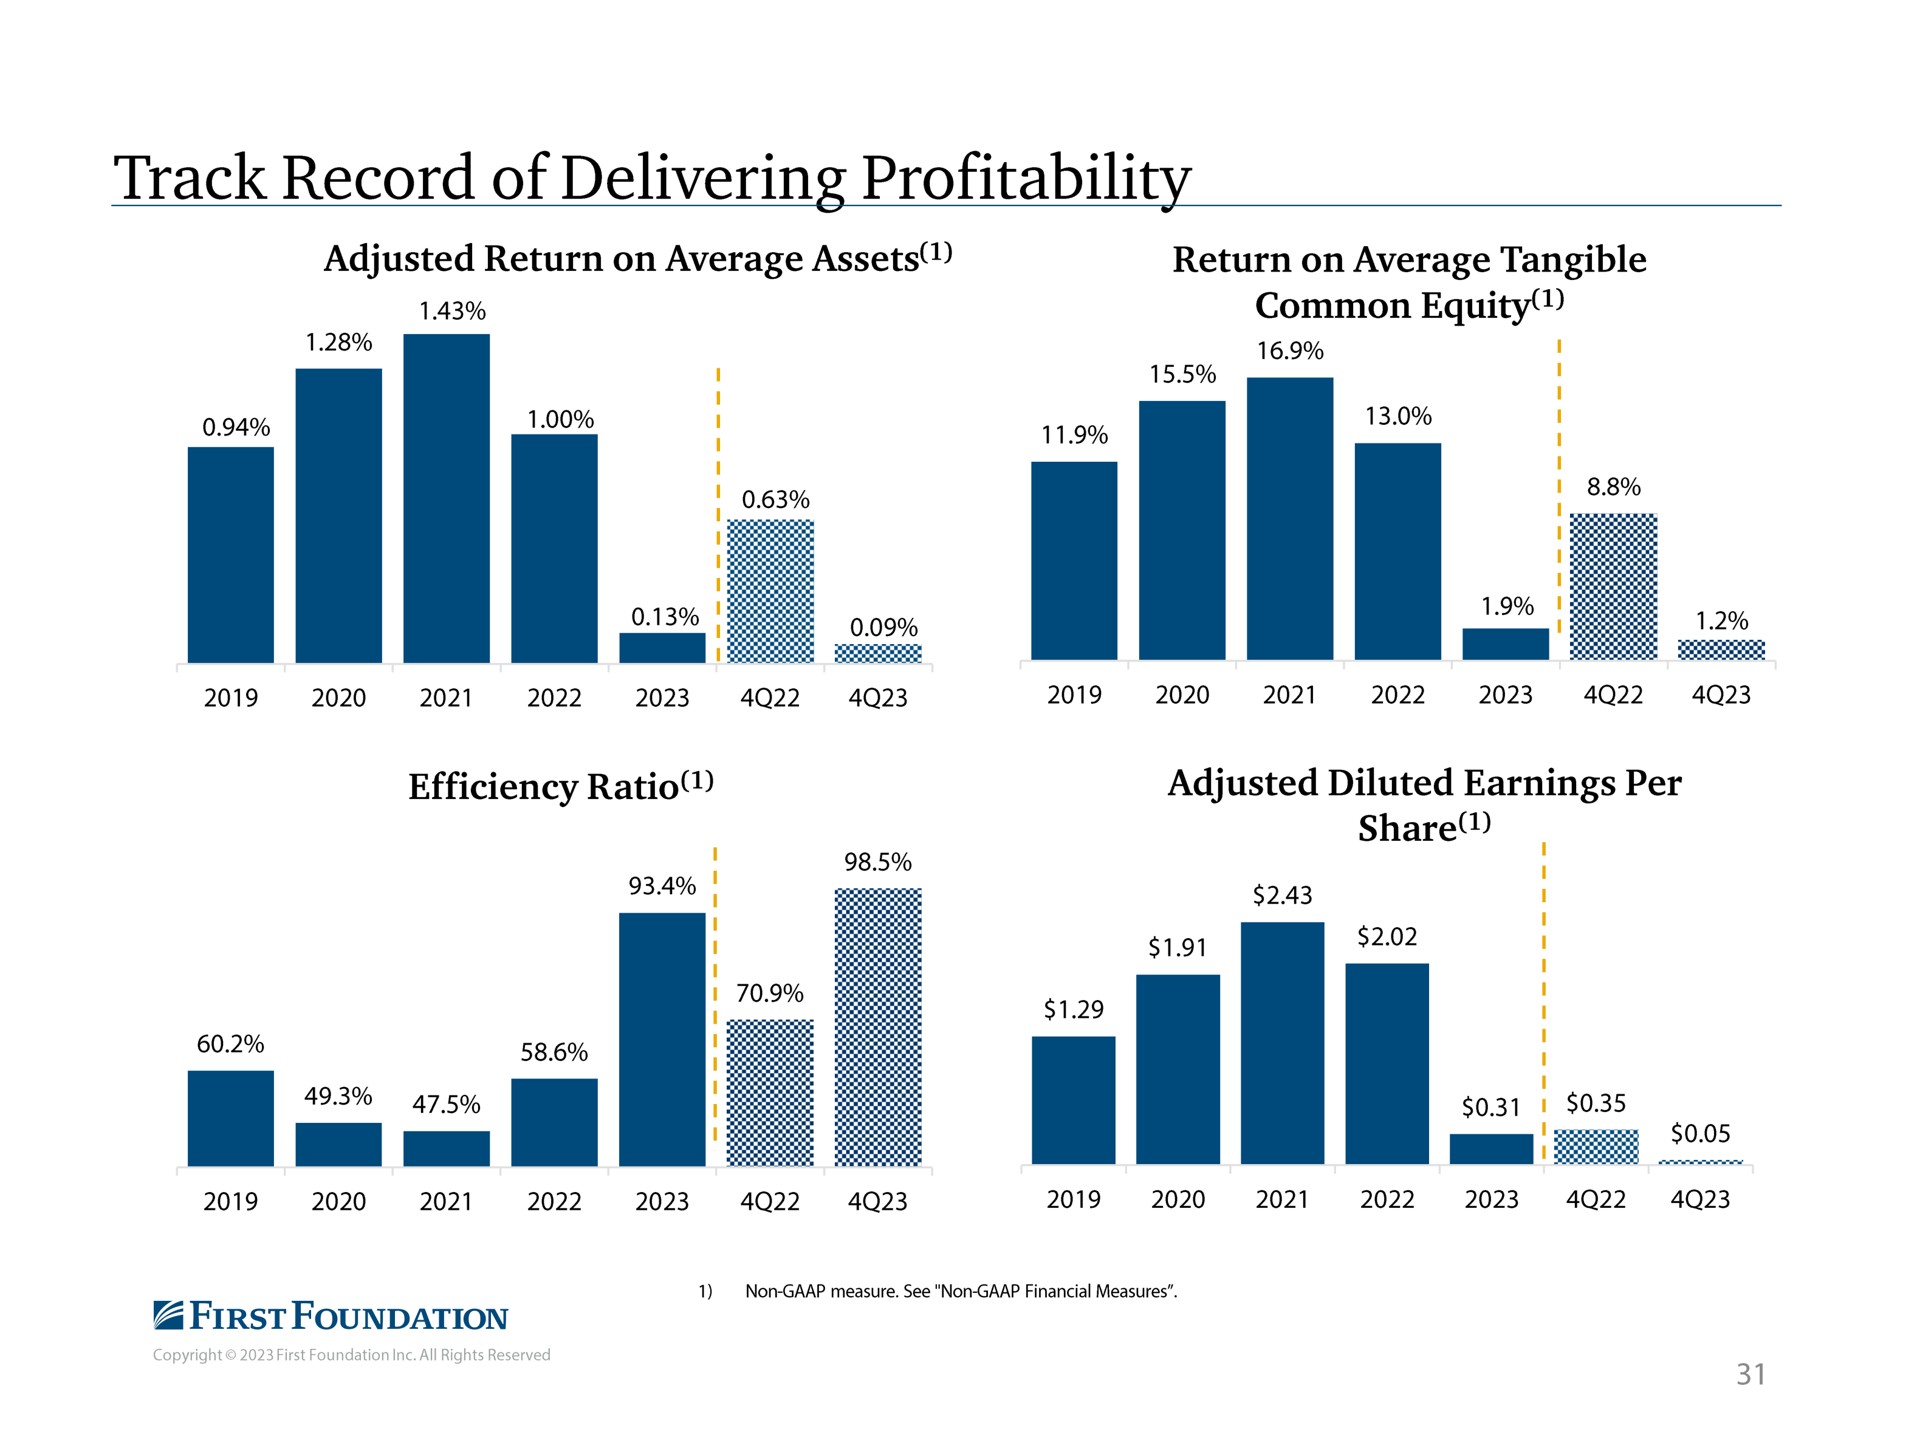 track record of delivering profitability adjusted return on average assets common equity efficiency ratio share | First Foundation